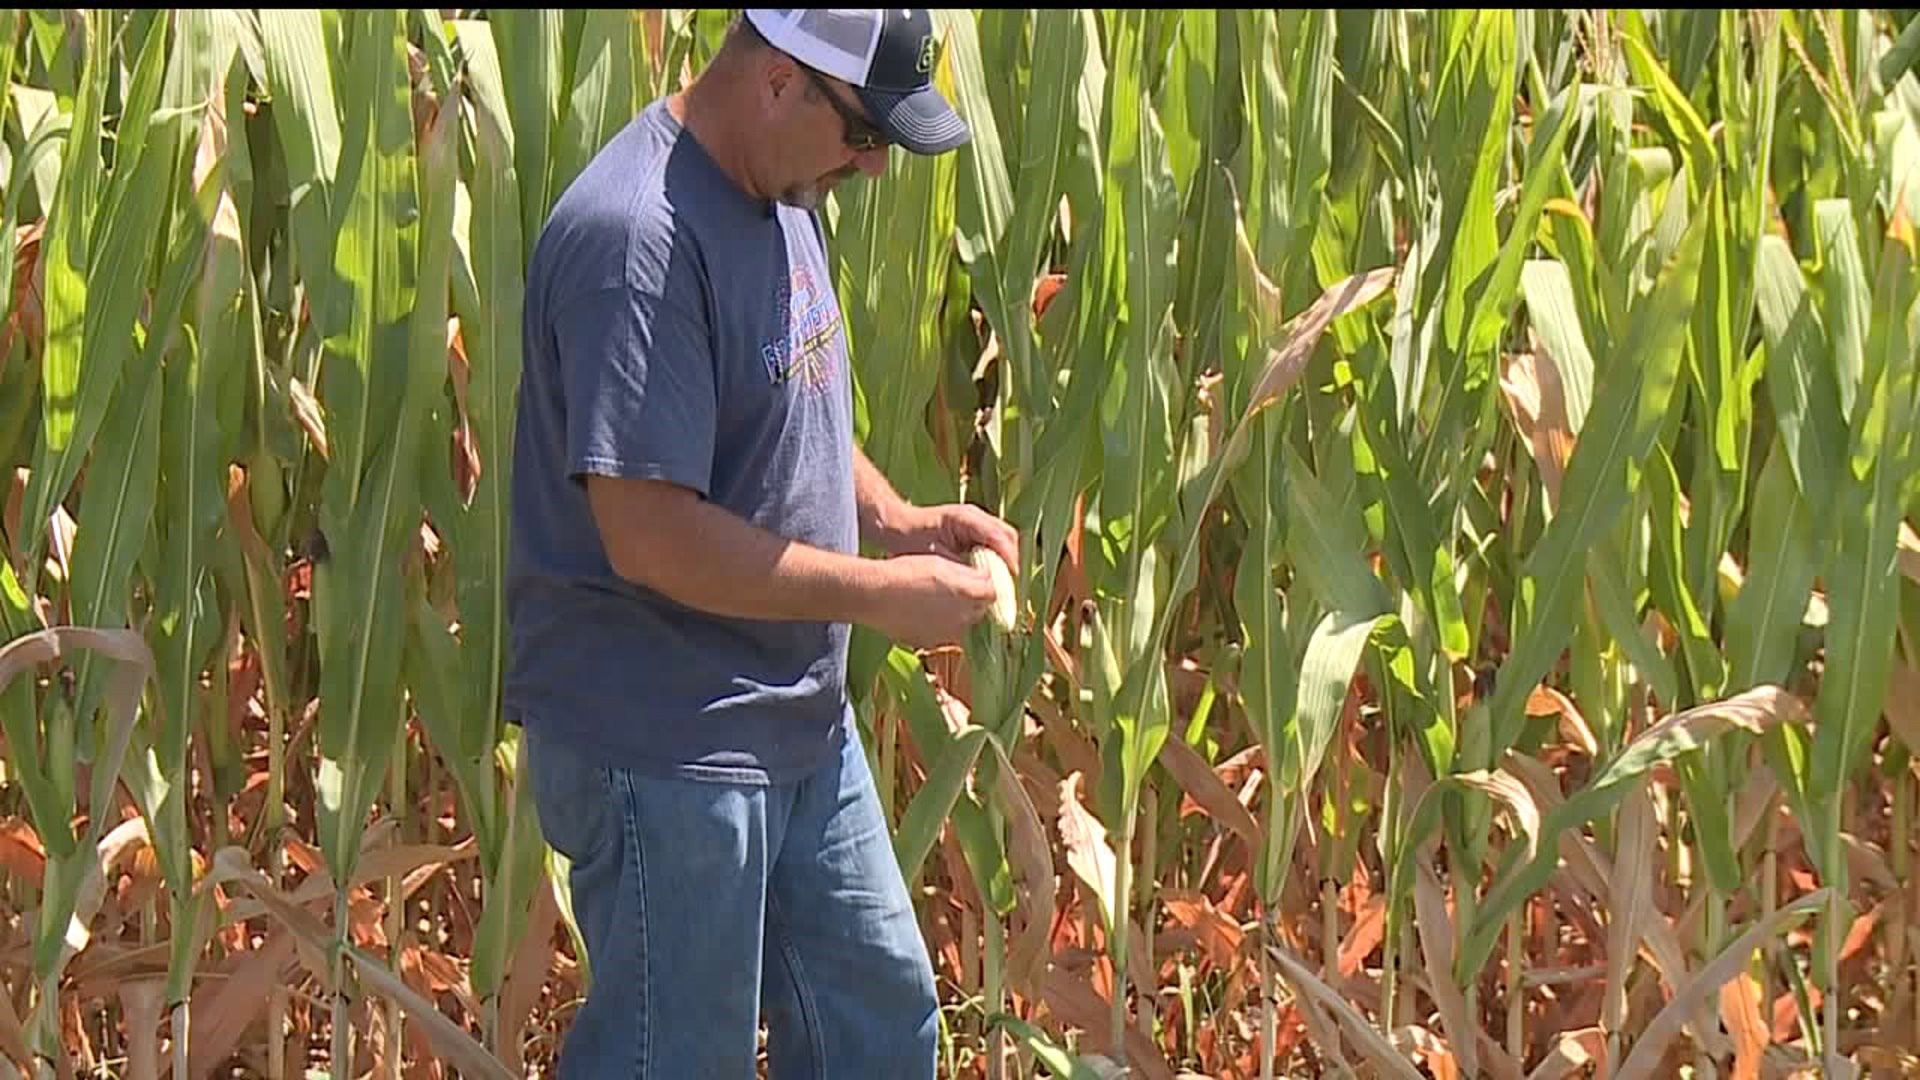 Corn and soybean farmers face uncertainty as drought drags on